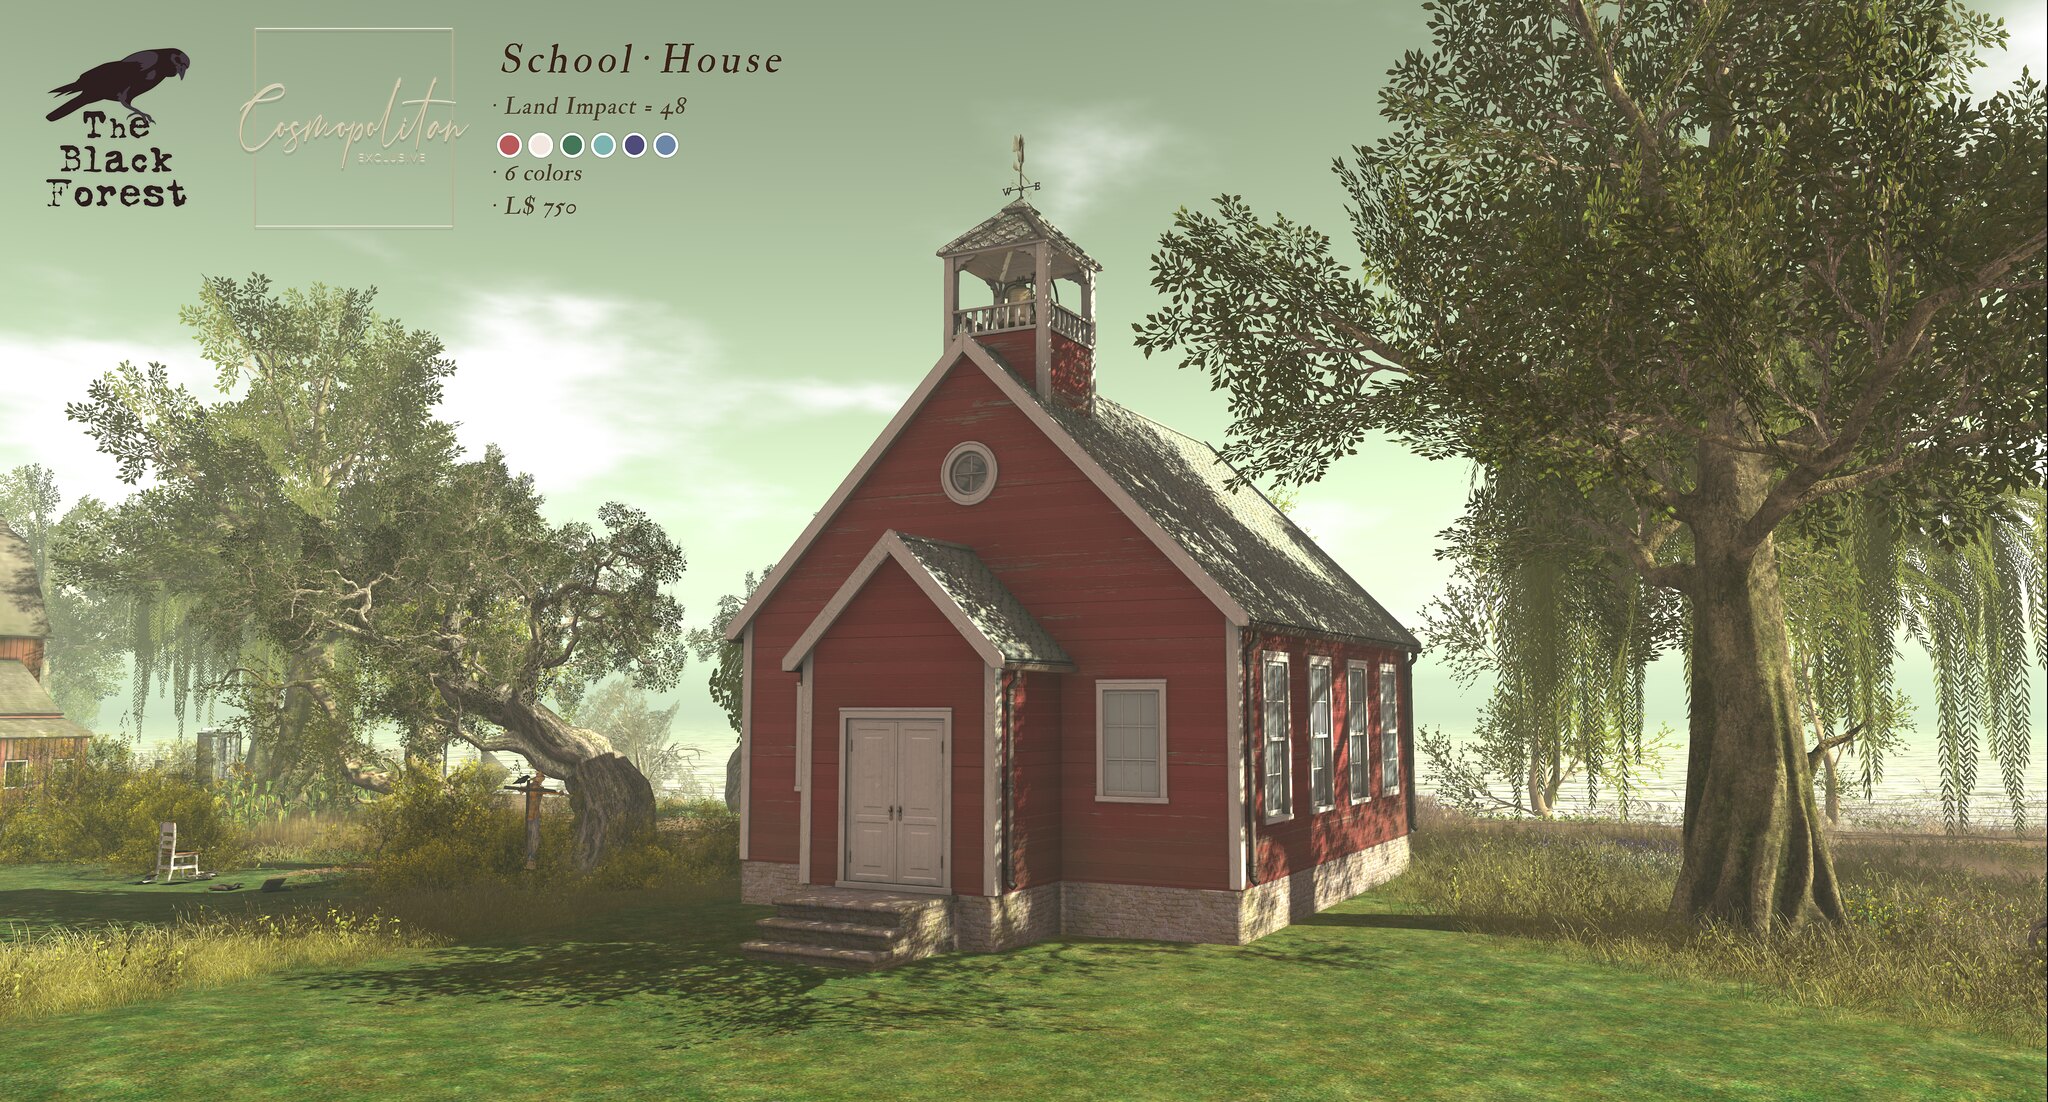 The Black Forest – School House